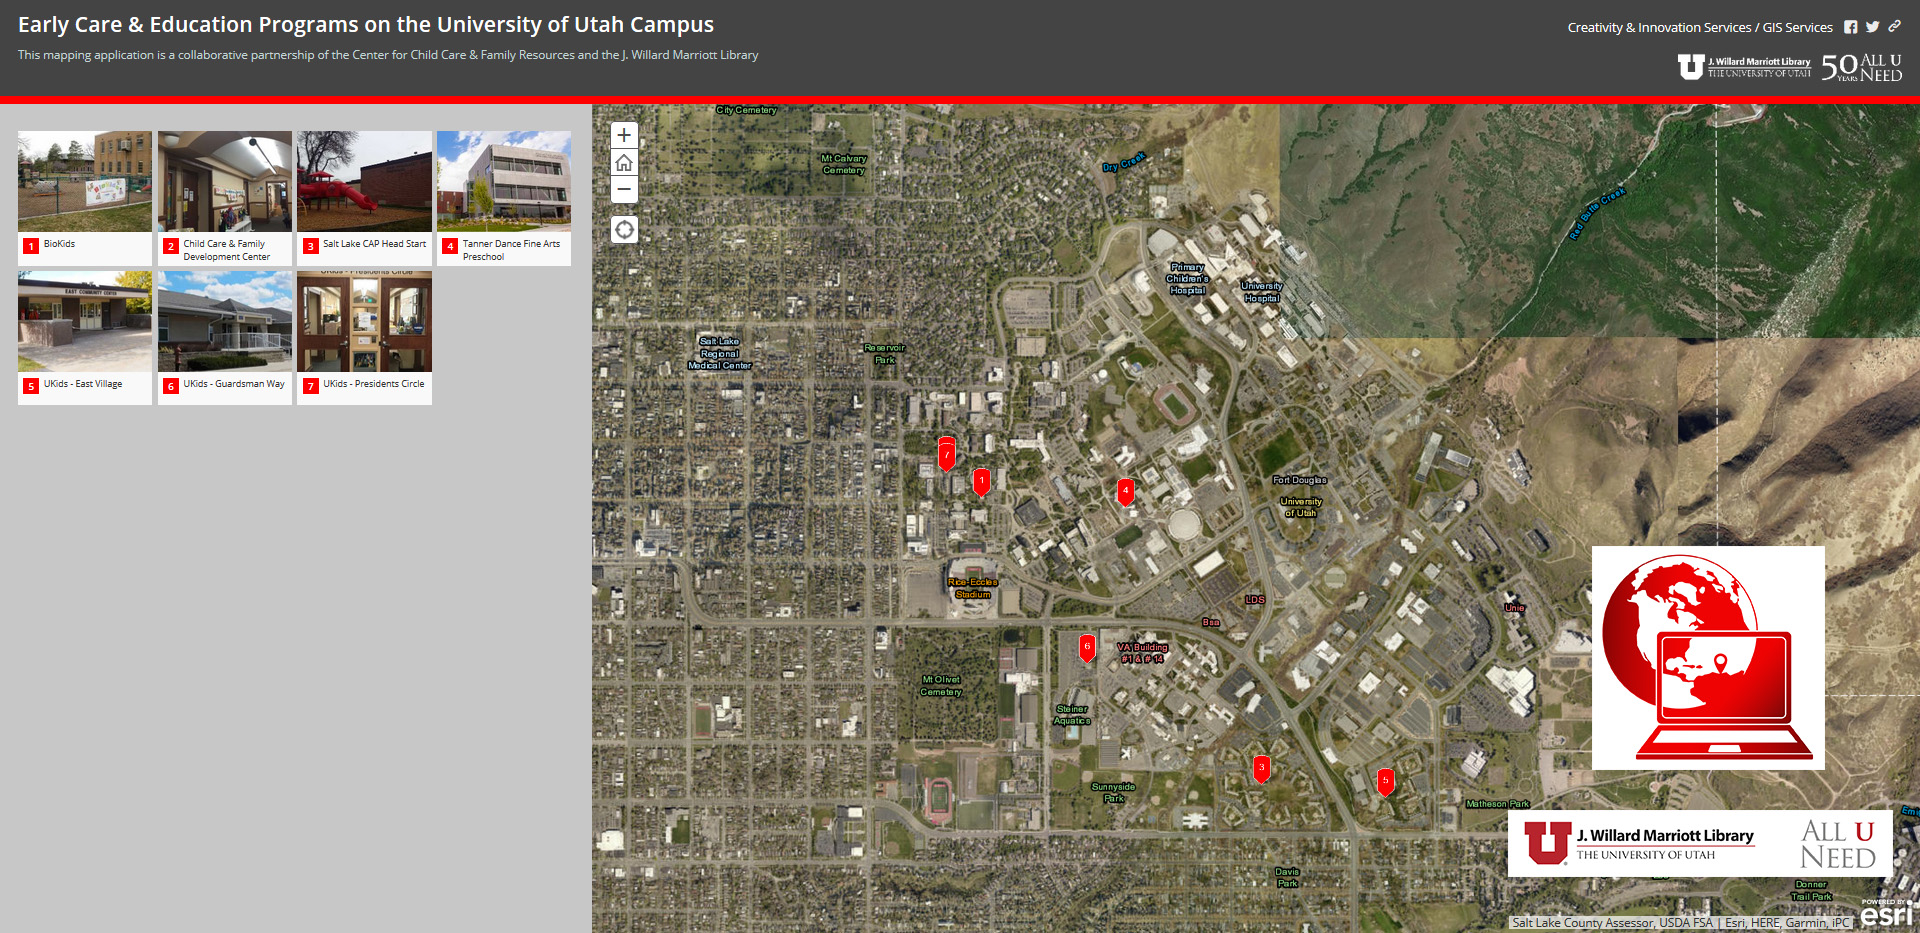 Early Care & Education Programs on the University of Utah Campus: A map identifying and visualizing early care & education program locations across campus.